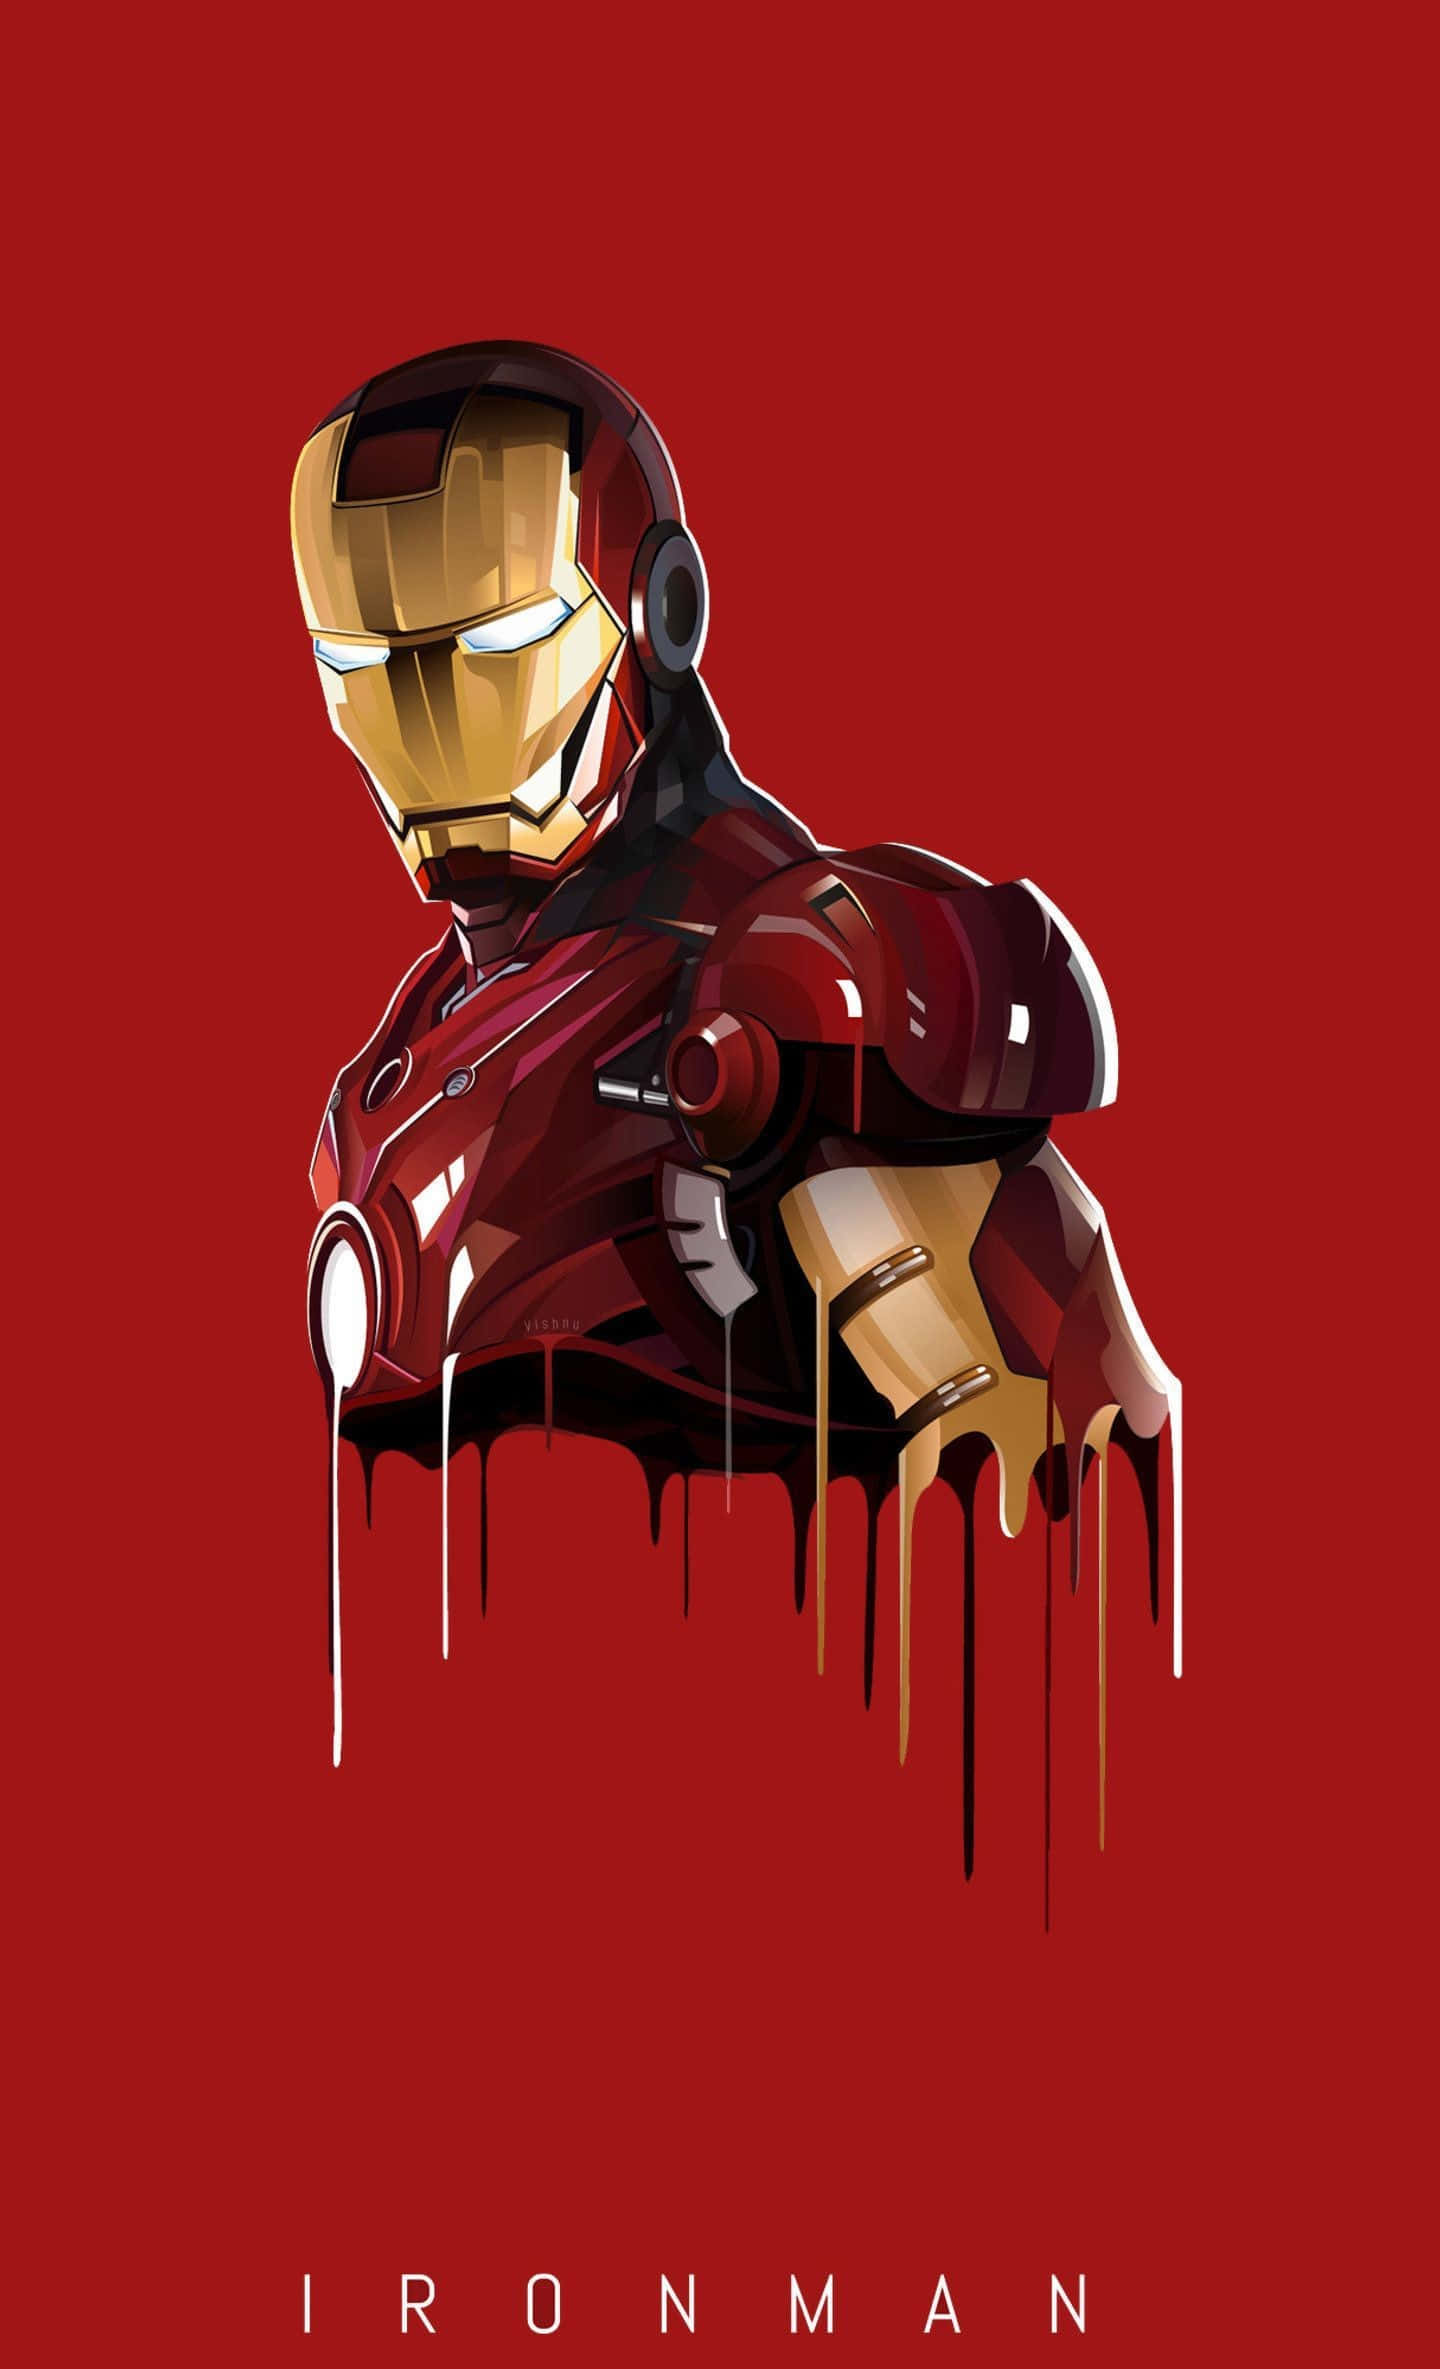 "This Iron Man Art is Comic Relief!" Wallpaper